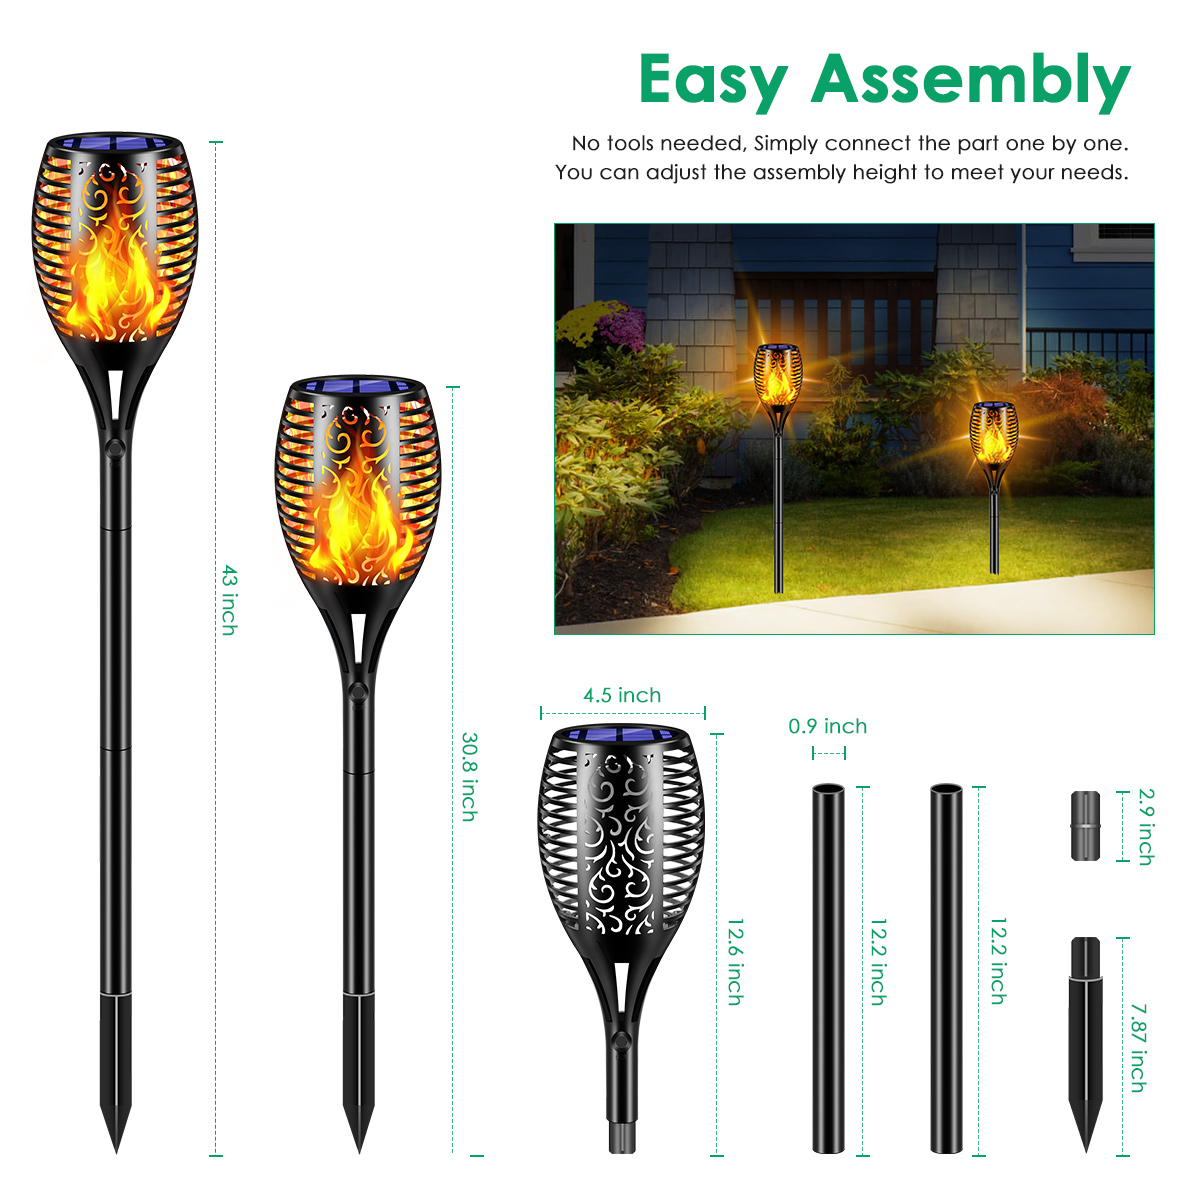 TomCare Solar Lights 99 LED Flickering Flame Solar Torches Lights 43" Waterproof Outdoor Lighting Solar Powered Pathway Lights Landscape Decoration Lighting Auto On/Off for Garden Patio Yard, 4 P